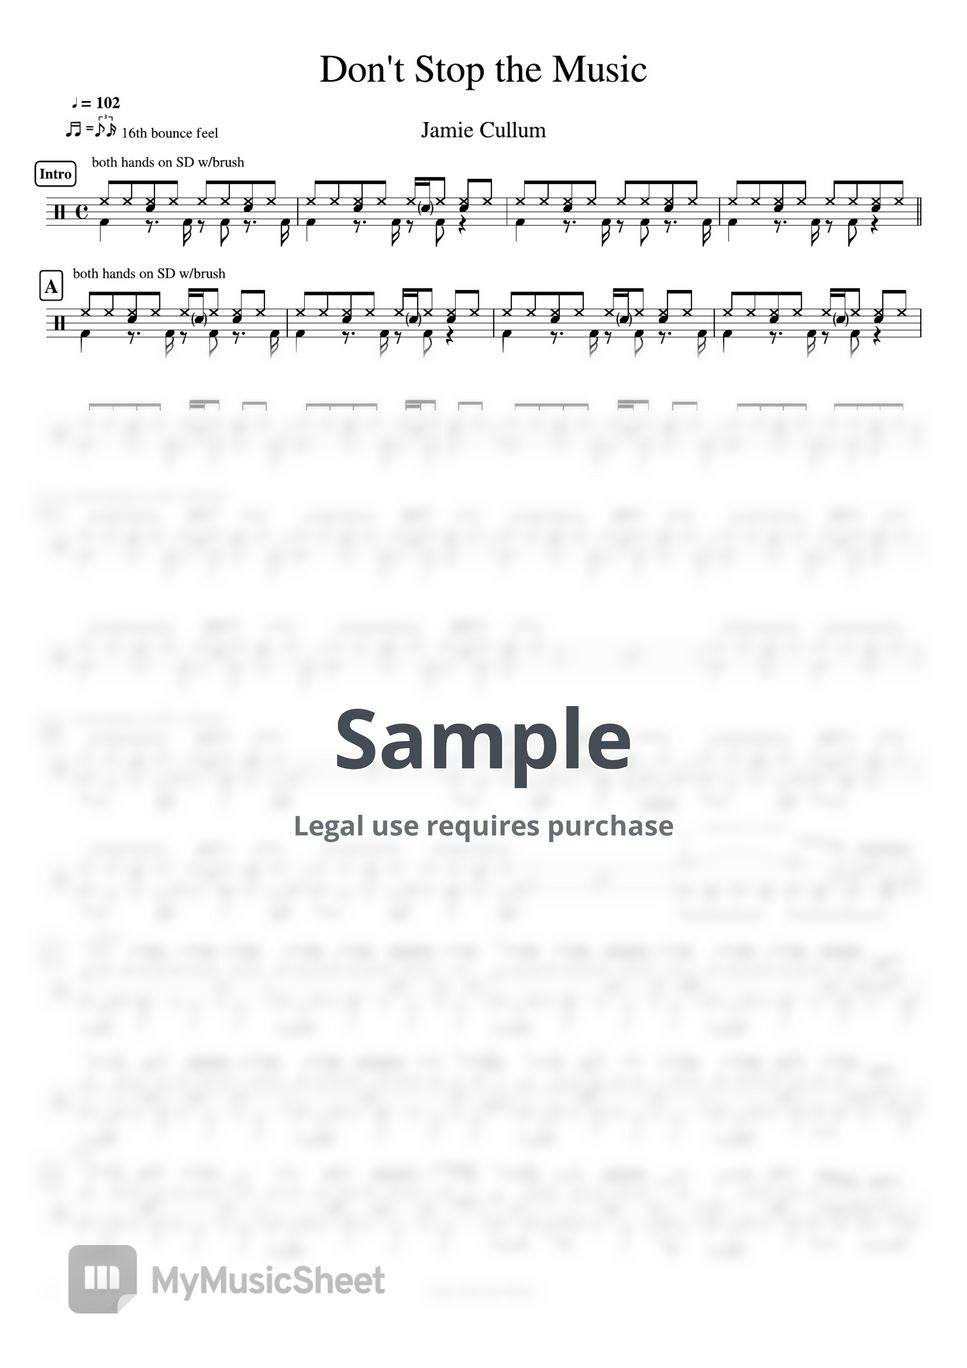 Jamie Cullum - Don't Stop the Music by Cookai's J-pop Drum sheet music!!!